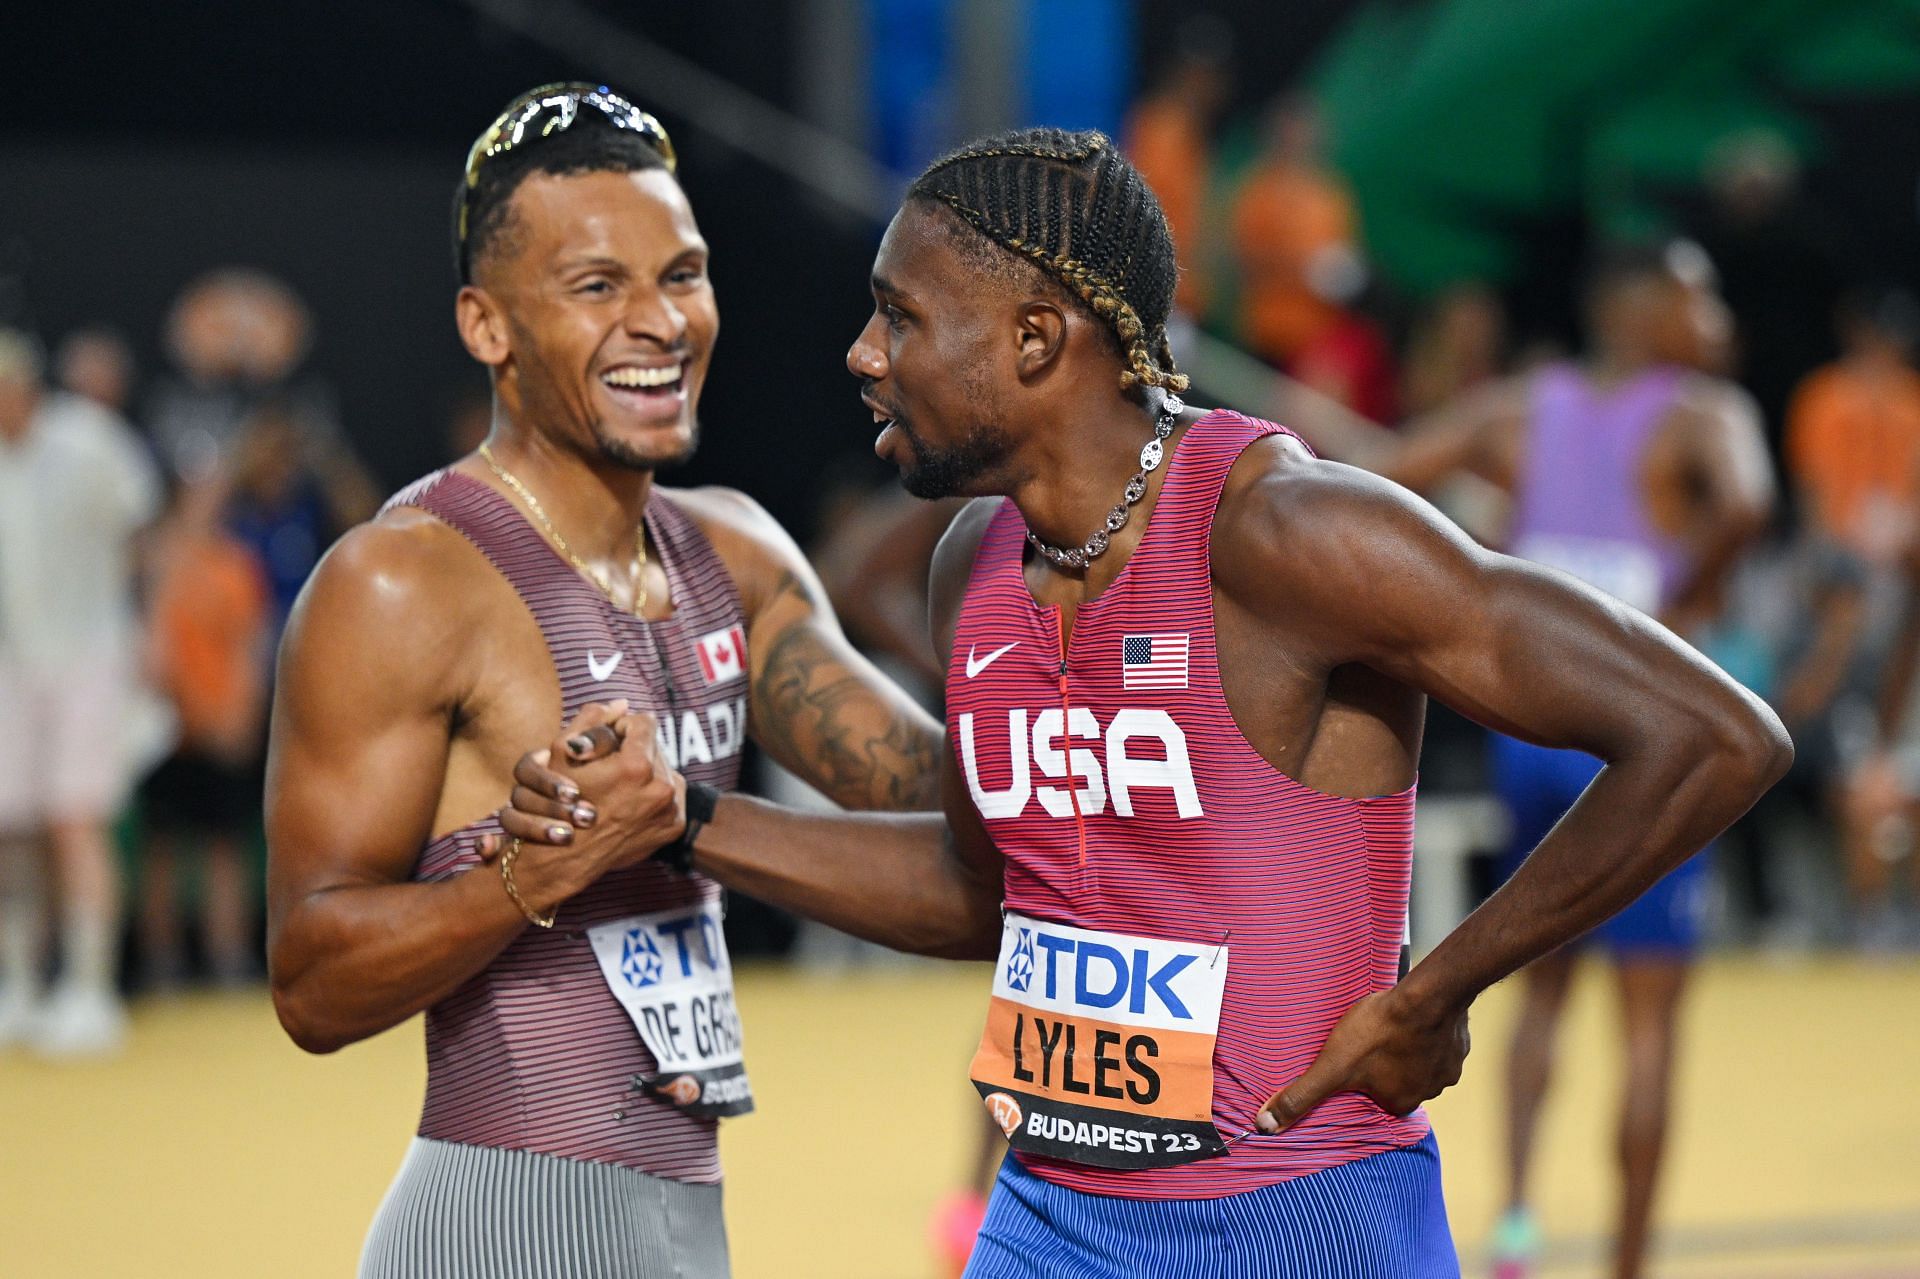 Noah Lyles and Andre De Grasse at Day 7 - World Athletics Championships Budapest 2023